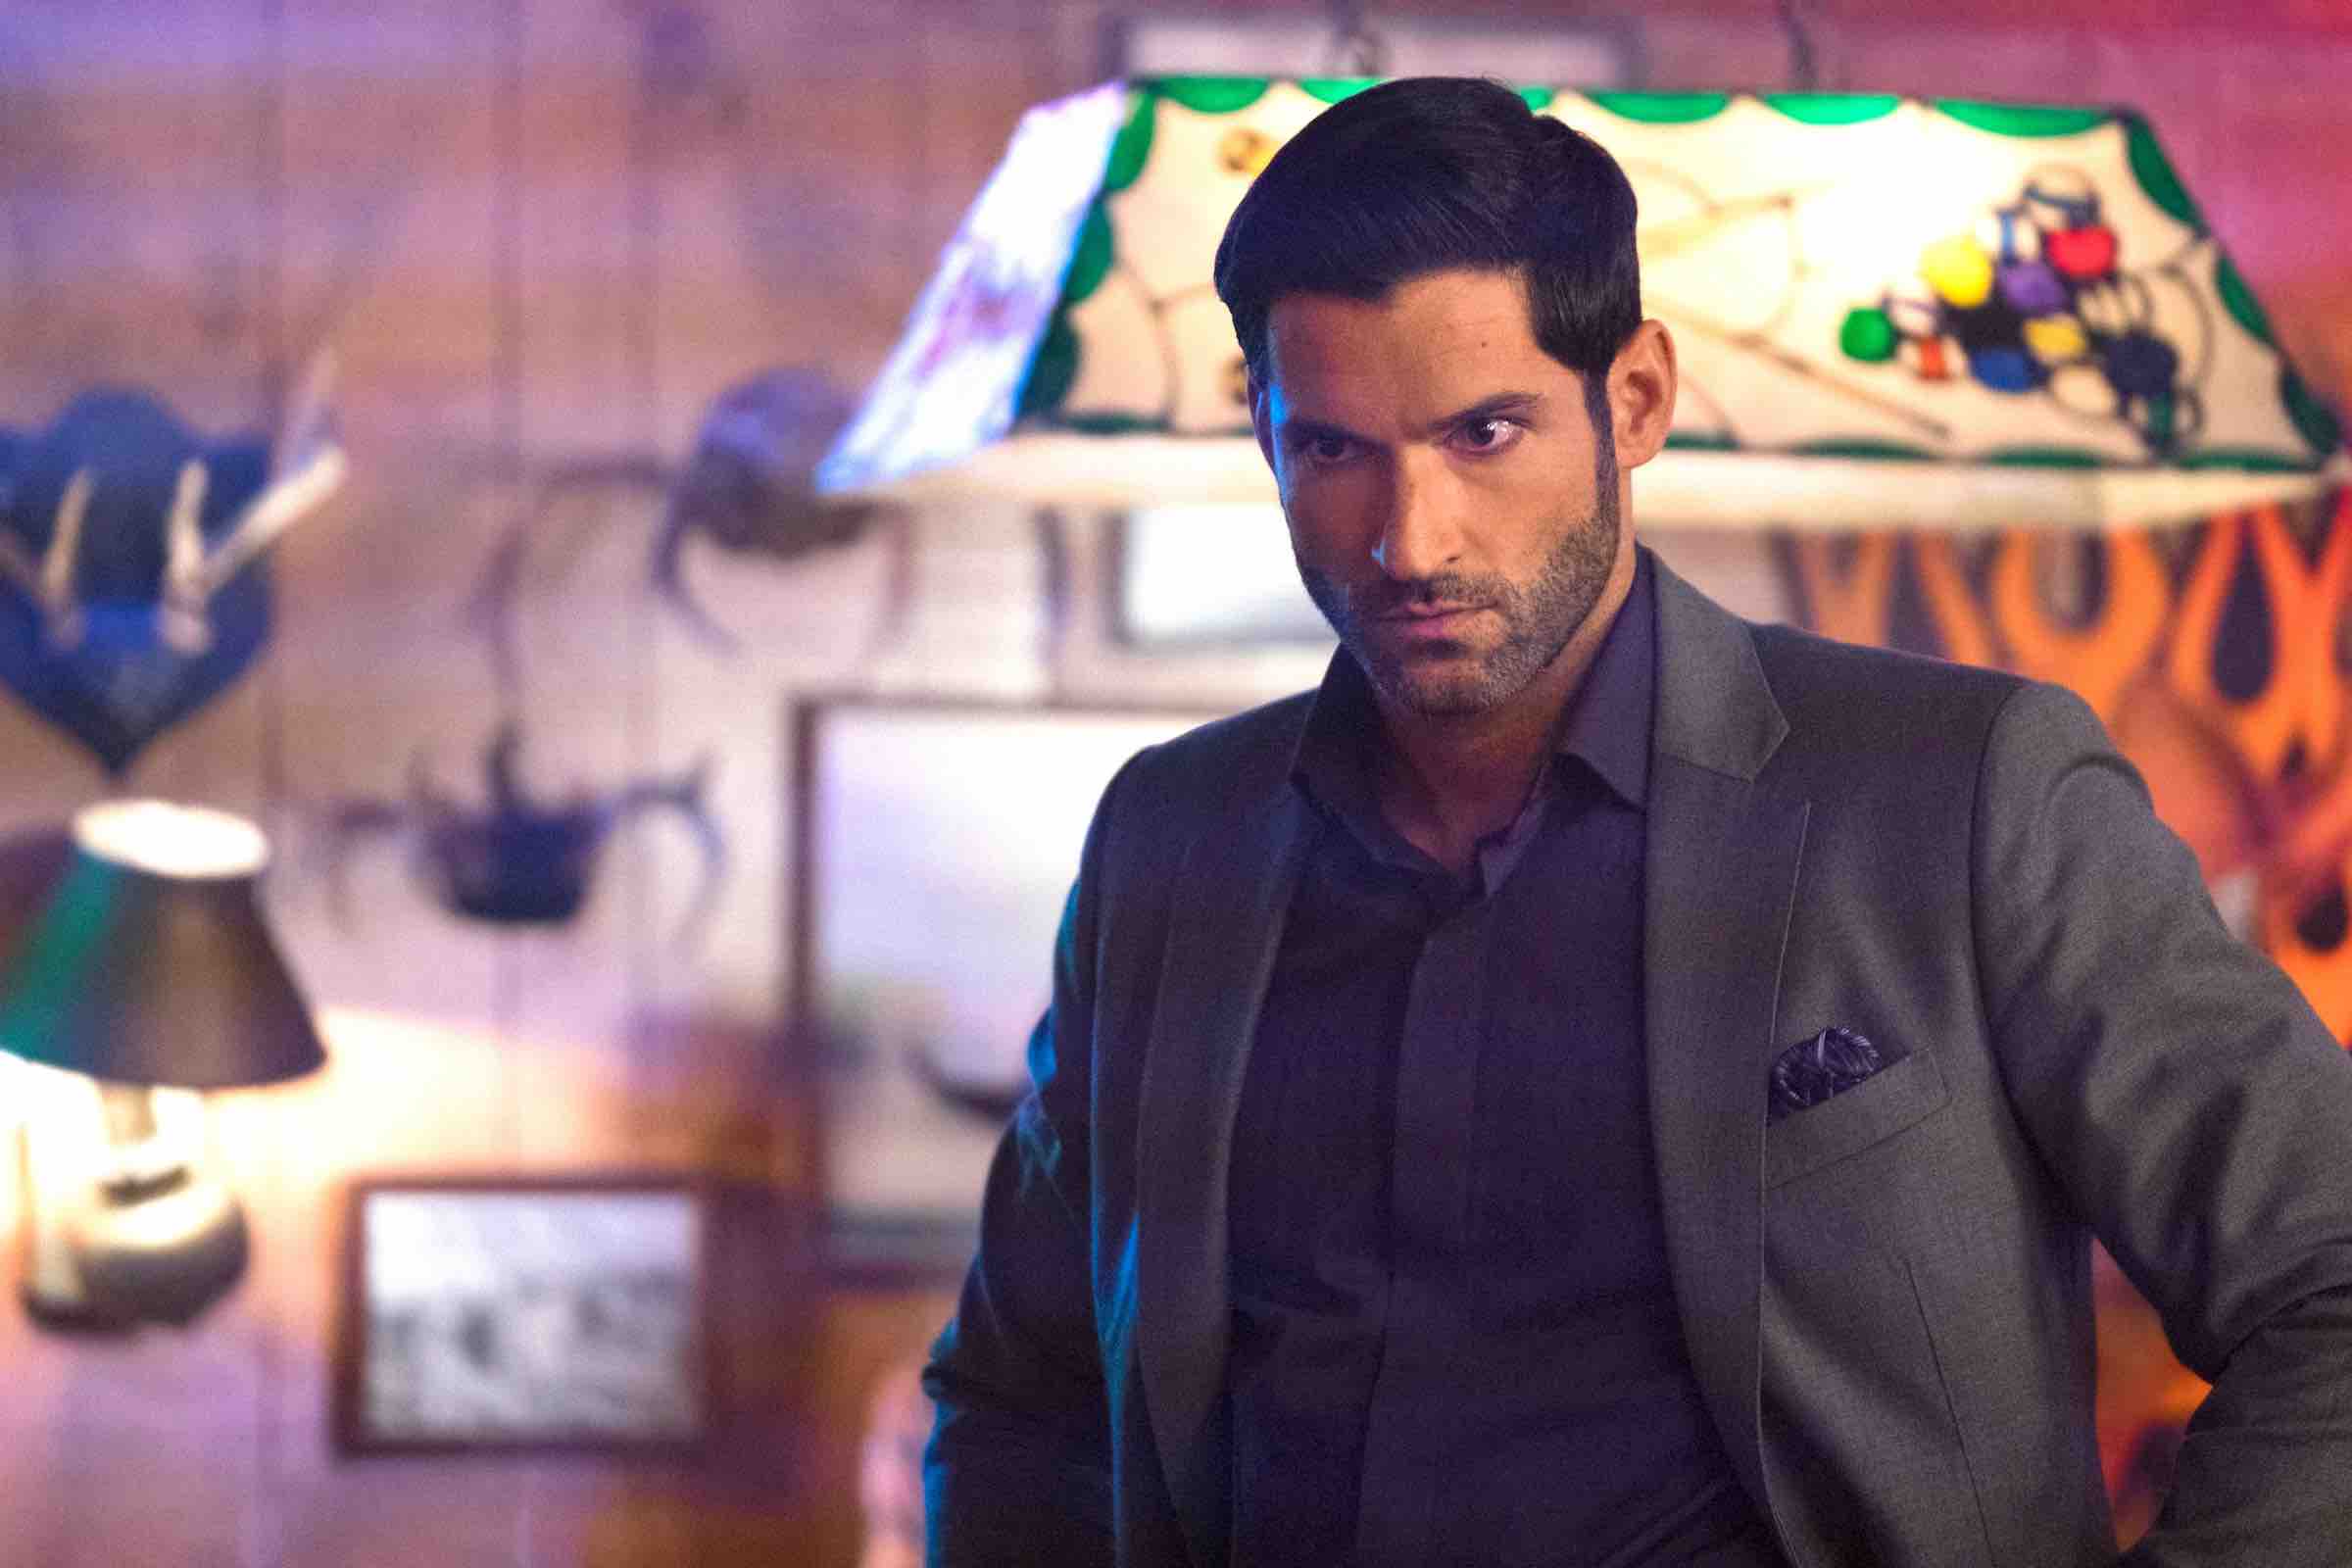 Netflix has announced the fifth season of 'Lucifer' will be its last, and we’re still not done. Let’s make a short film about the Lucifans. Join in now.